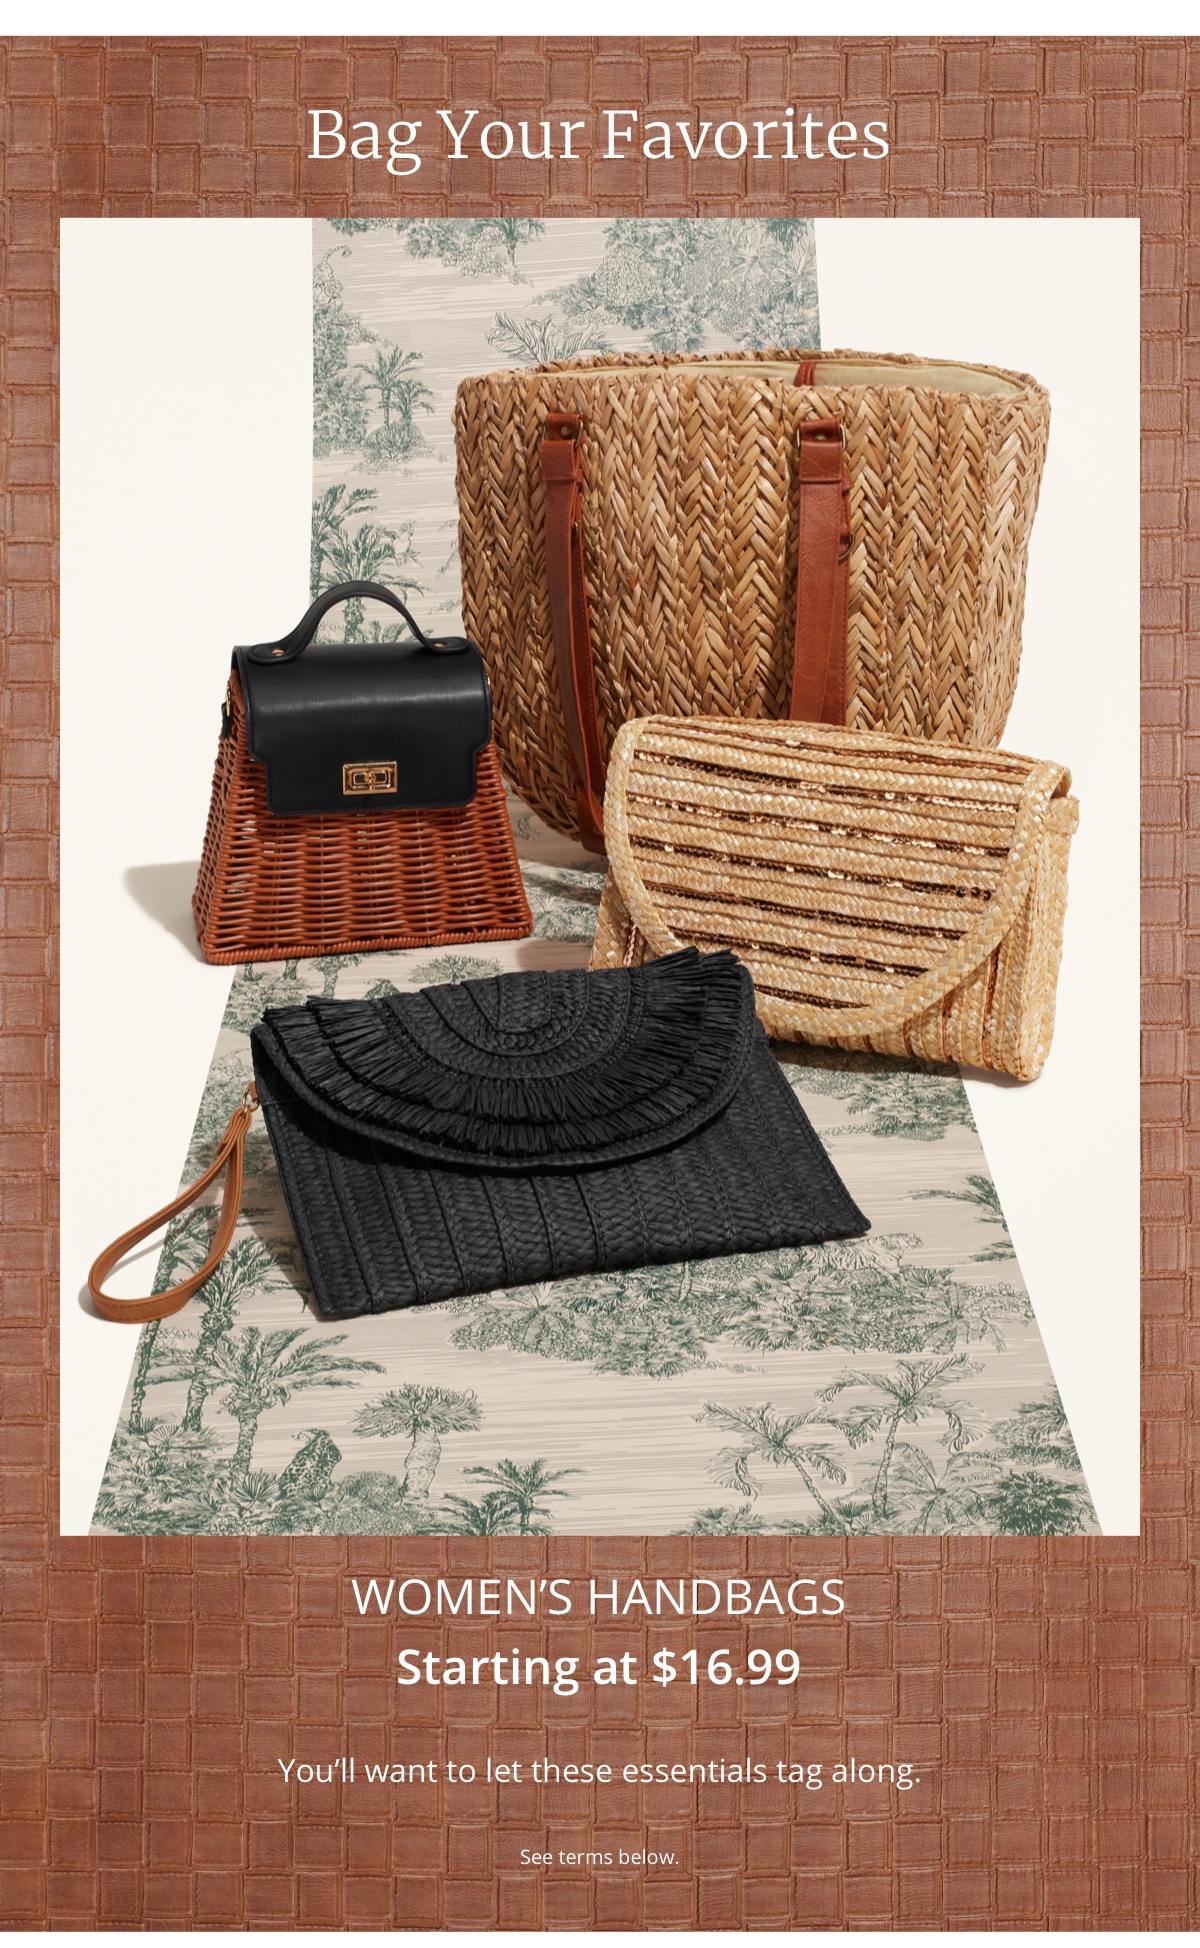 Bag Your Favorites|Womens Handbags|Starting at $16.99|Youll want to let these essentials tag along.|See terms below.